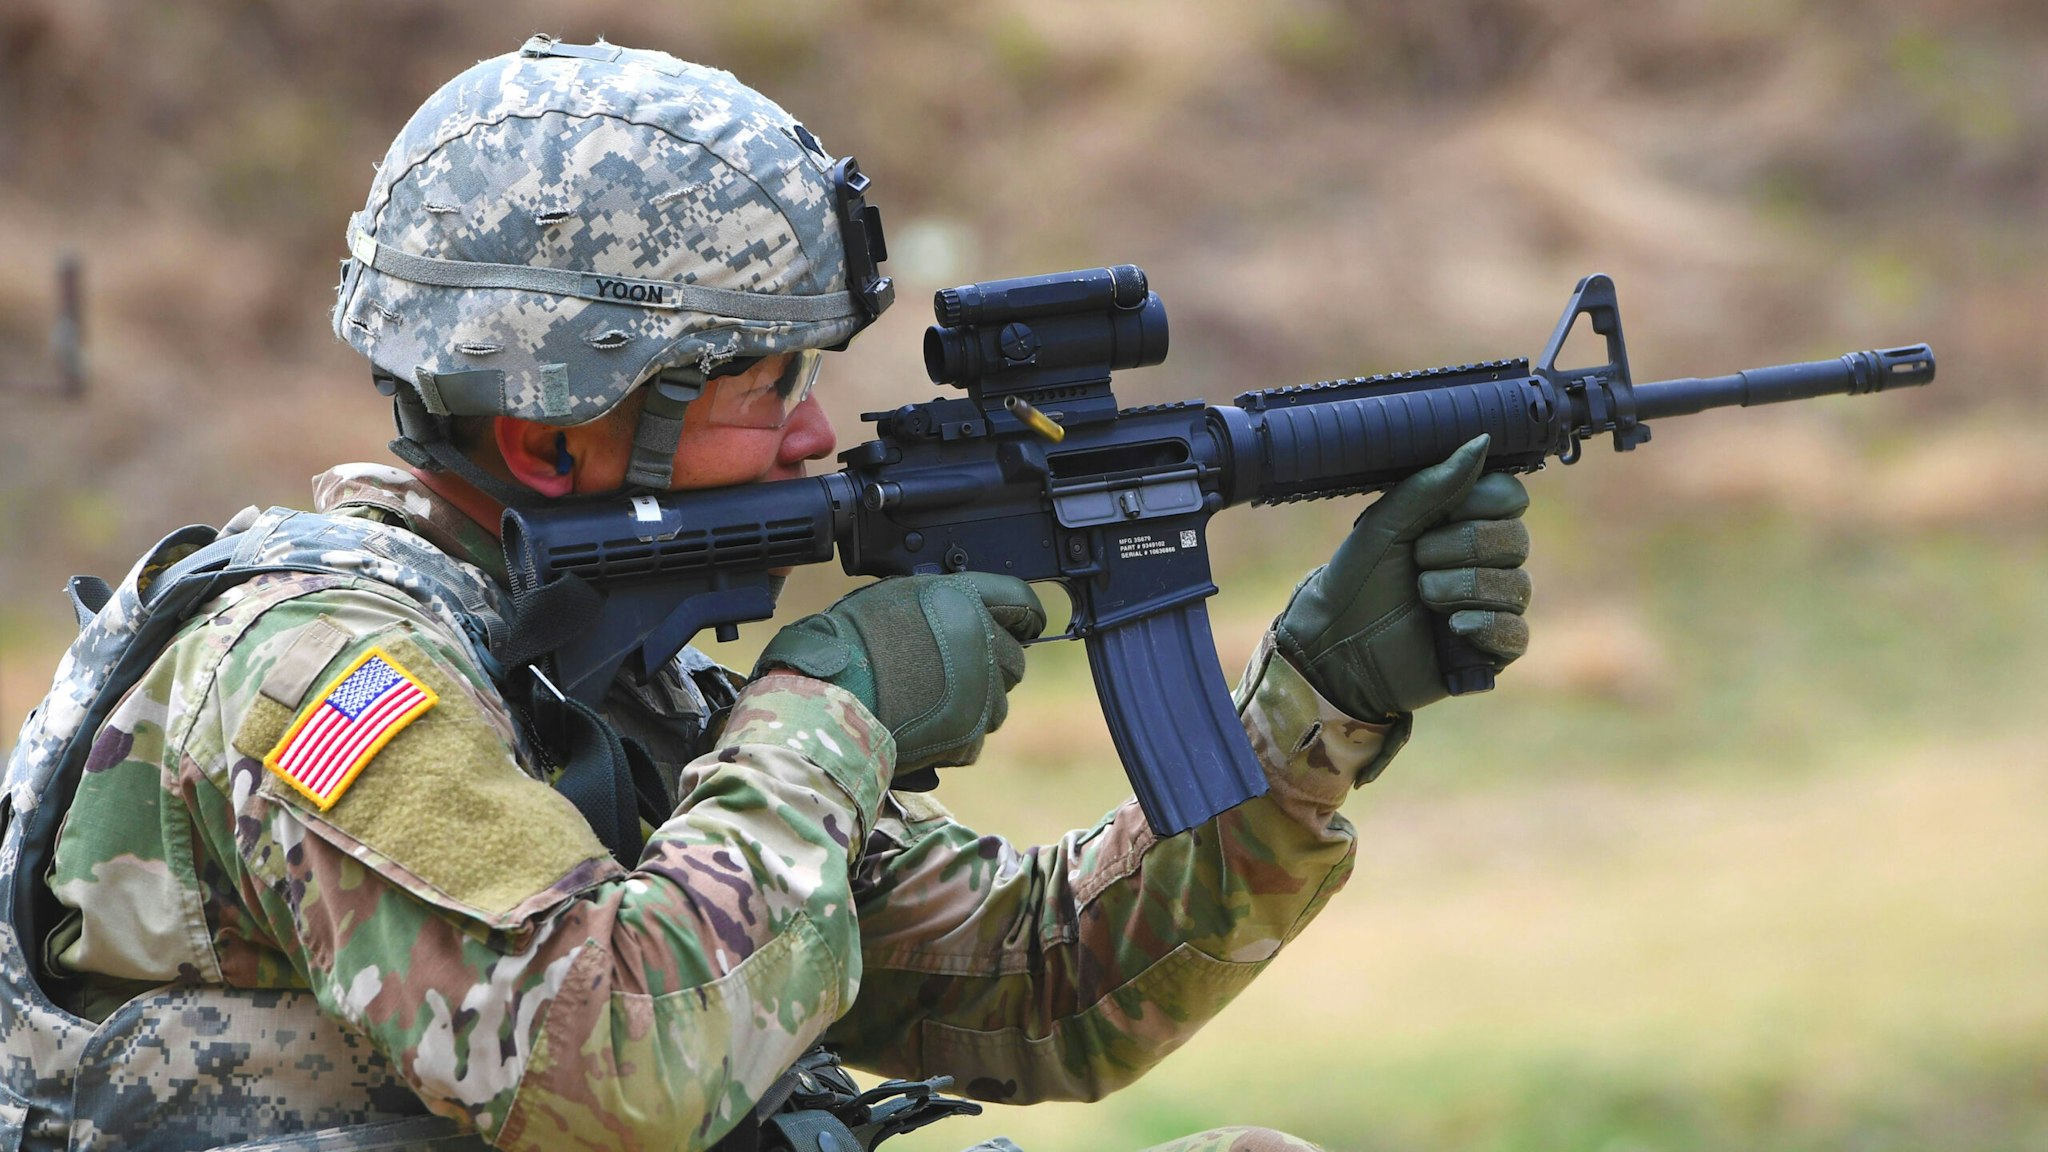 A US soldier aims his rifle at a shooting range during a Stress Shoot test of the 2018 Best Warrior Competition at Camp Casey in Dongducheon, north of Seoul, on April 10, 2018 US 2nd Infantry Division held the annual competition where 24 soldiers competed in a variety of events testing them both physically and mentally.